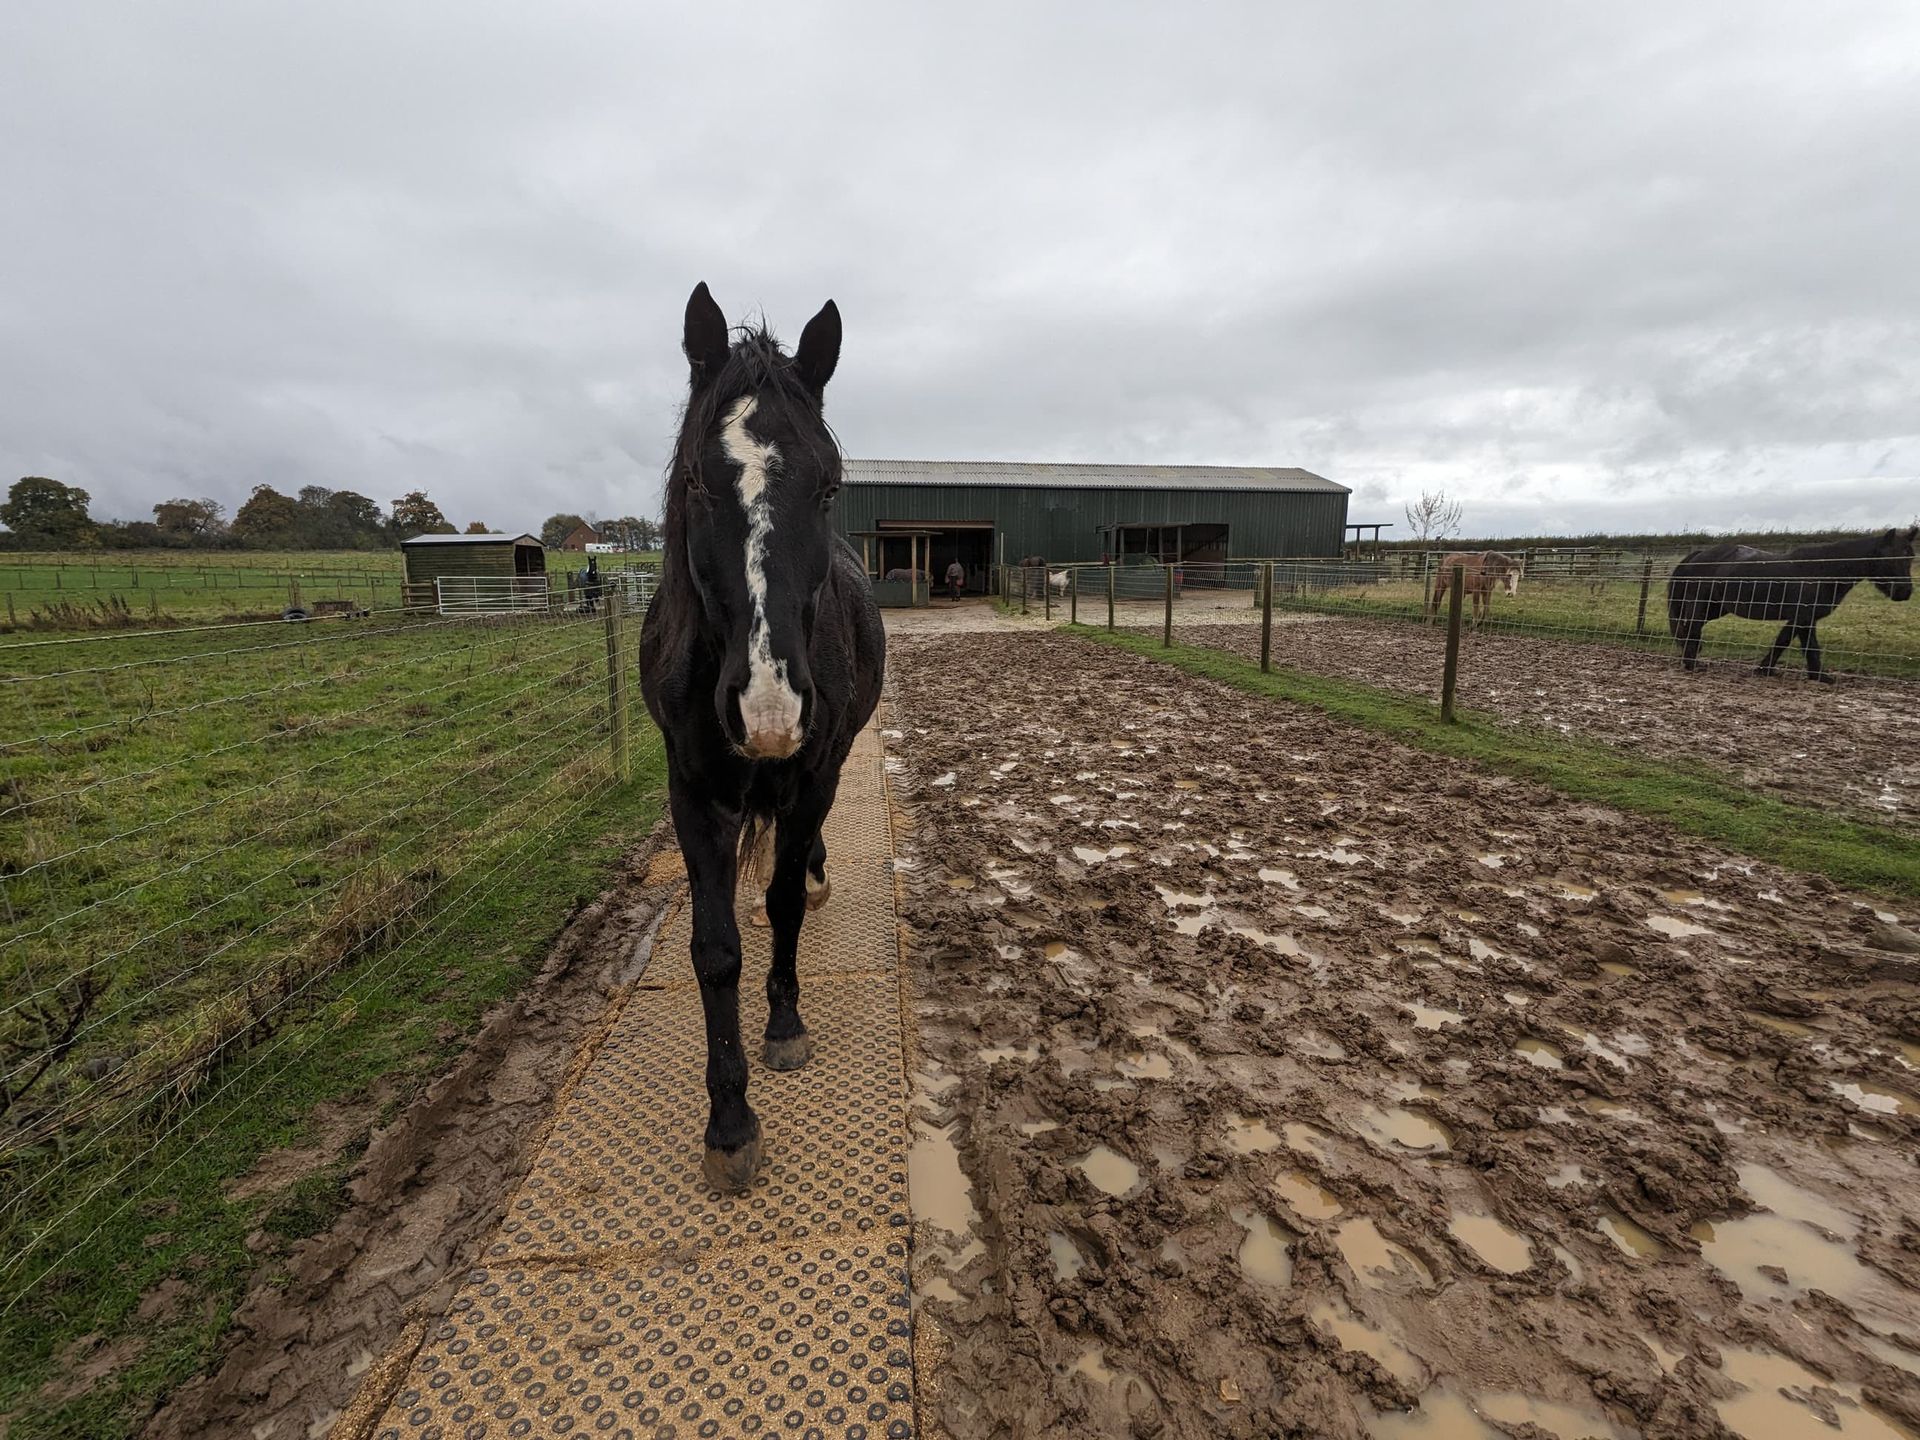 Abbotts view livery dark horse walking on top clean mud mats next to muddy track